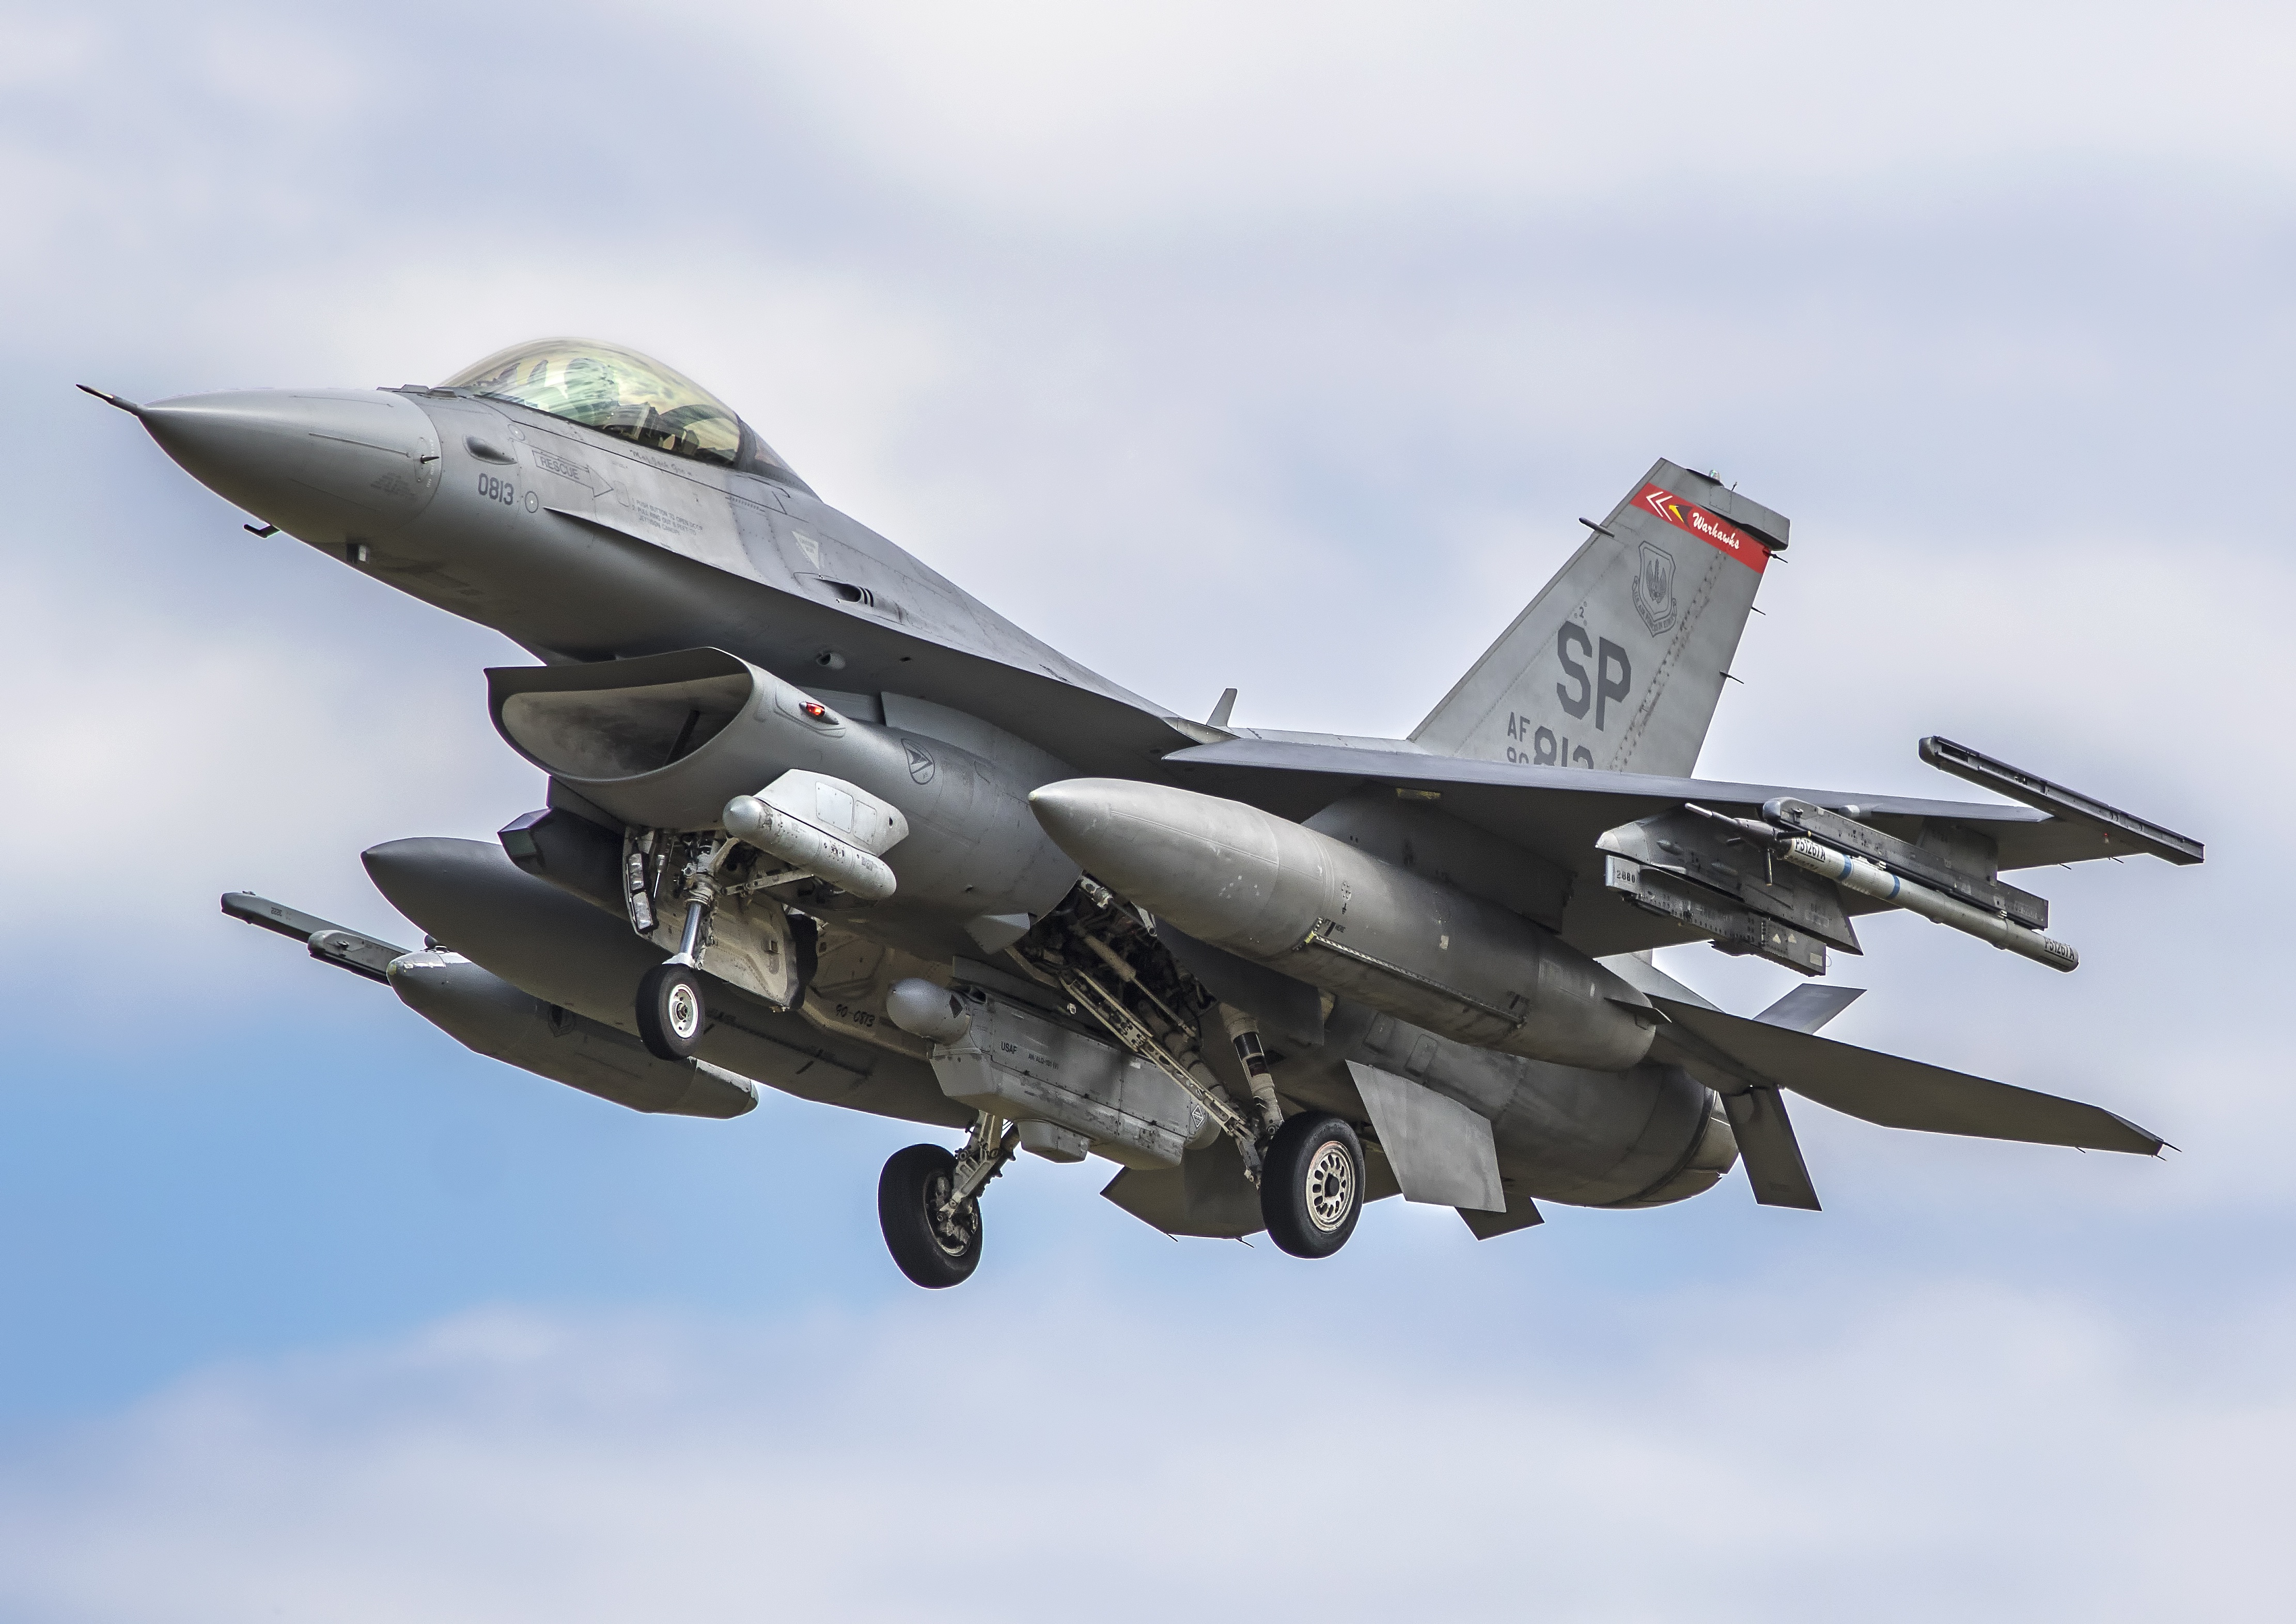 Wallpaper General Dynamics F-16 Fighting Falcon, Air superiority ...